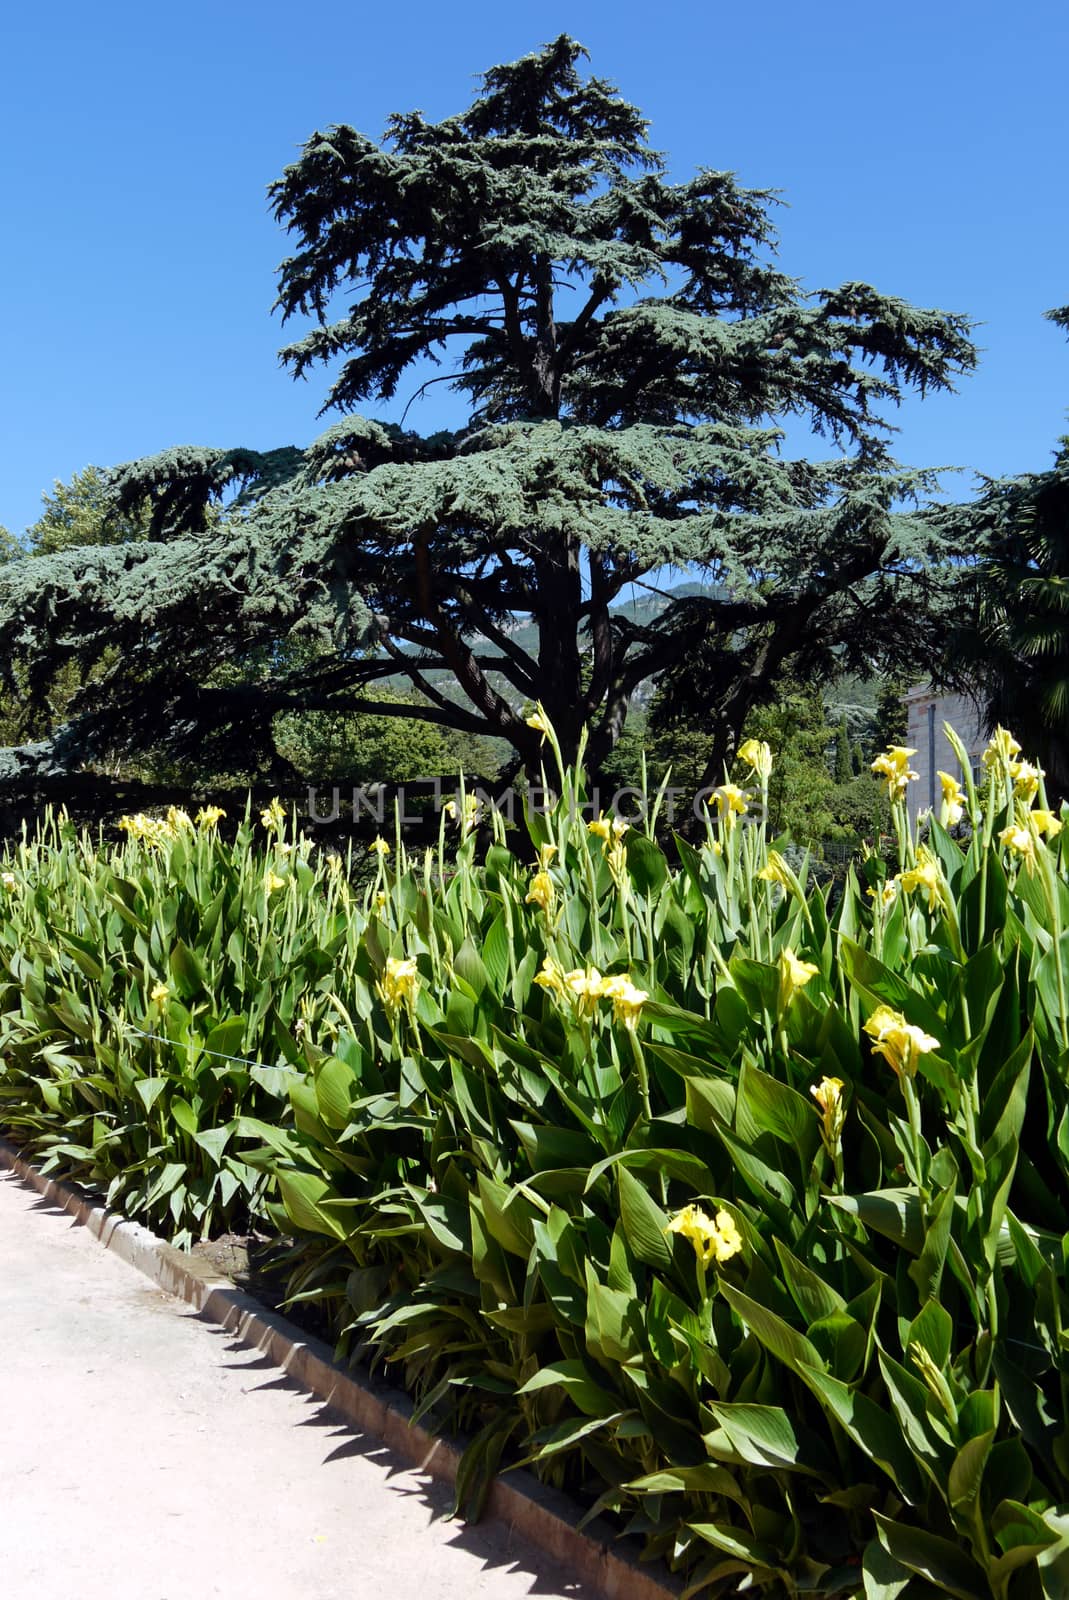 A beautiful view in the park on a hot summer day on a bed of high stems of yellow flowers with large wide leaves growing next to a soft tree against a blue clear sky.